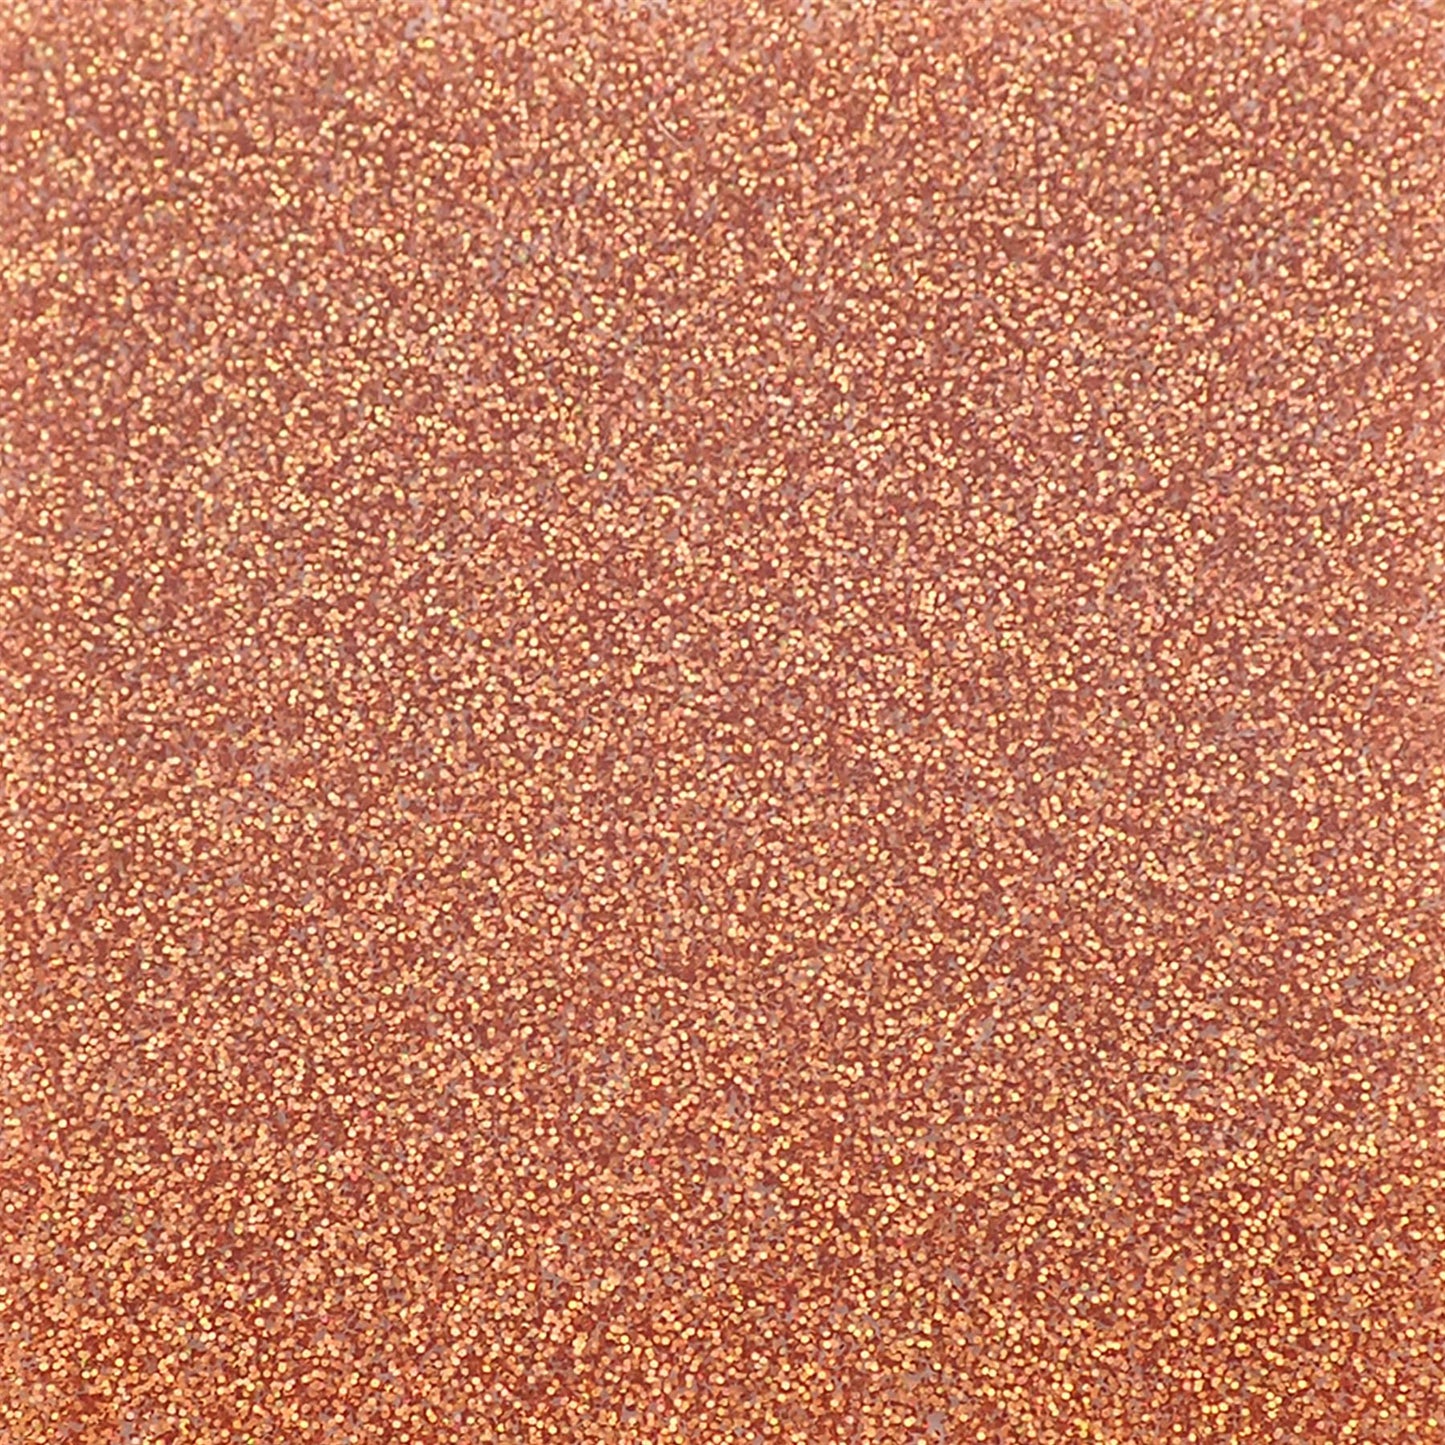 Incudo Copper Holographic Glitter Acrylic Sheet - 500x300x3mm